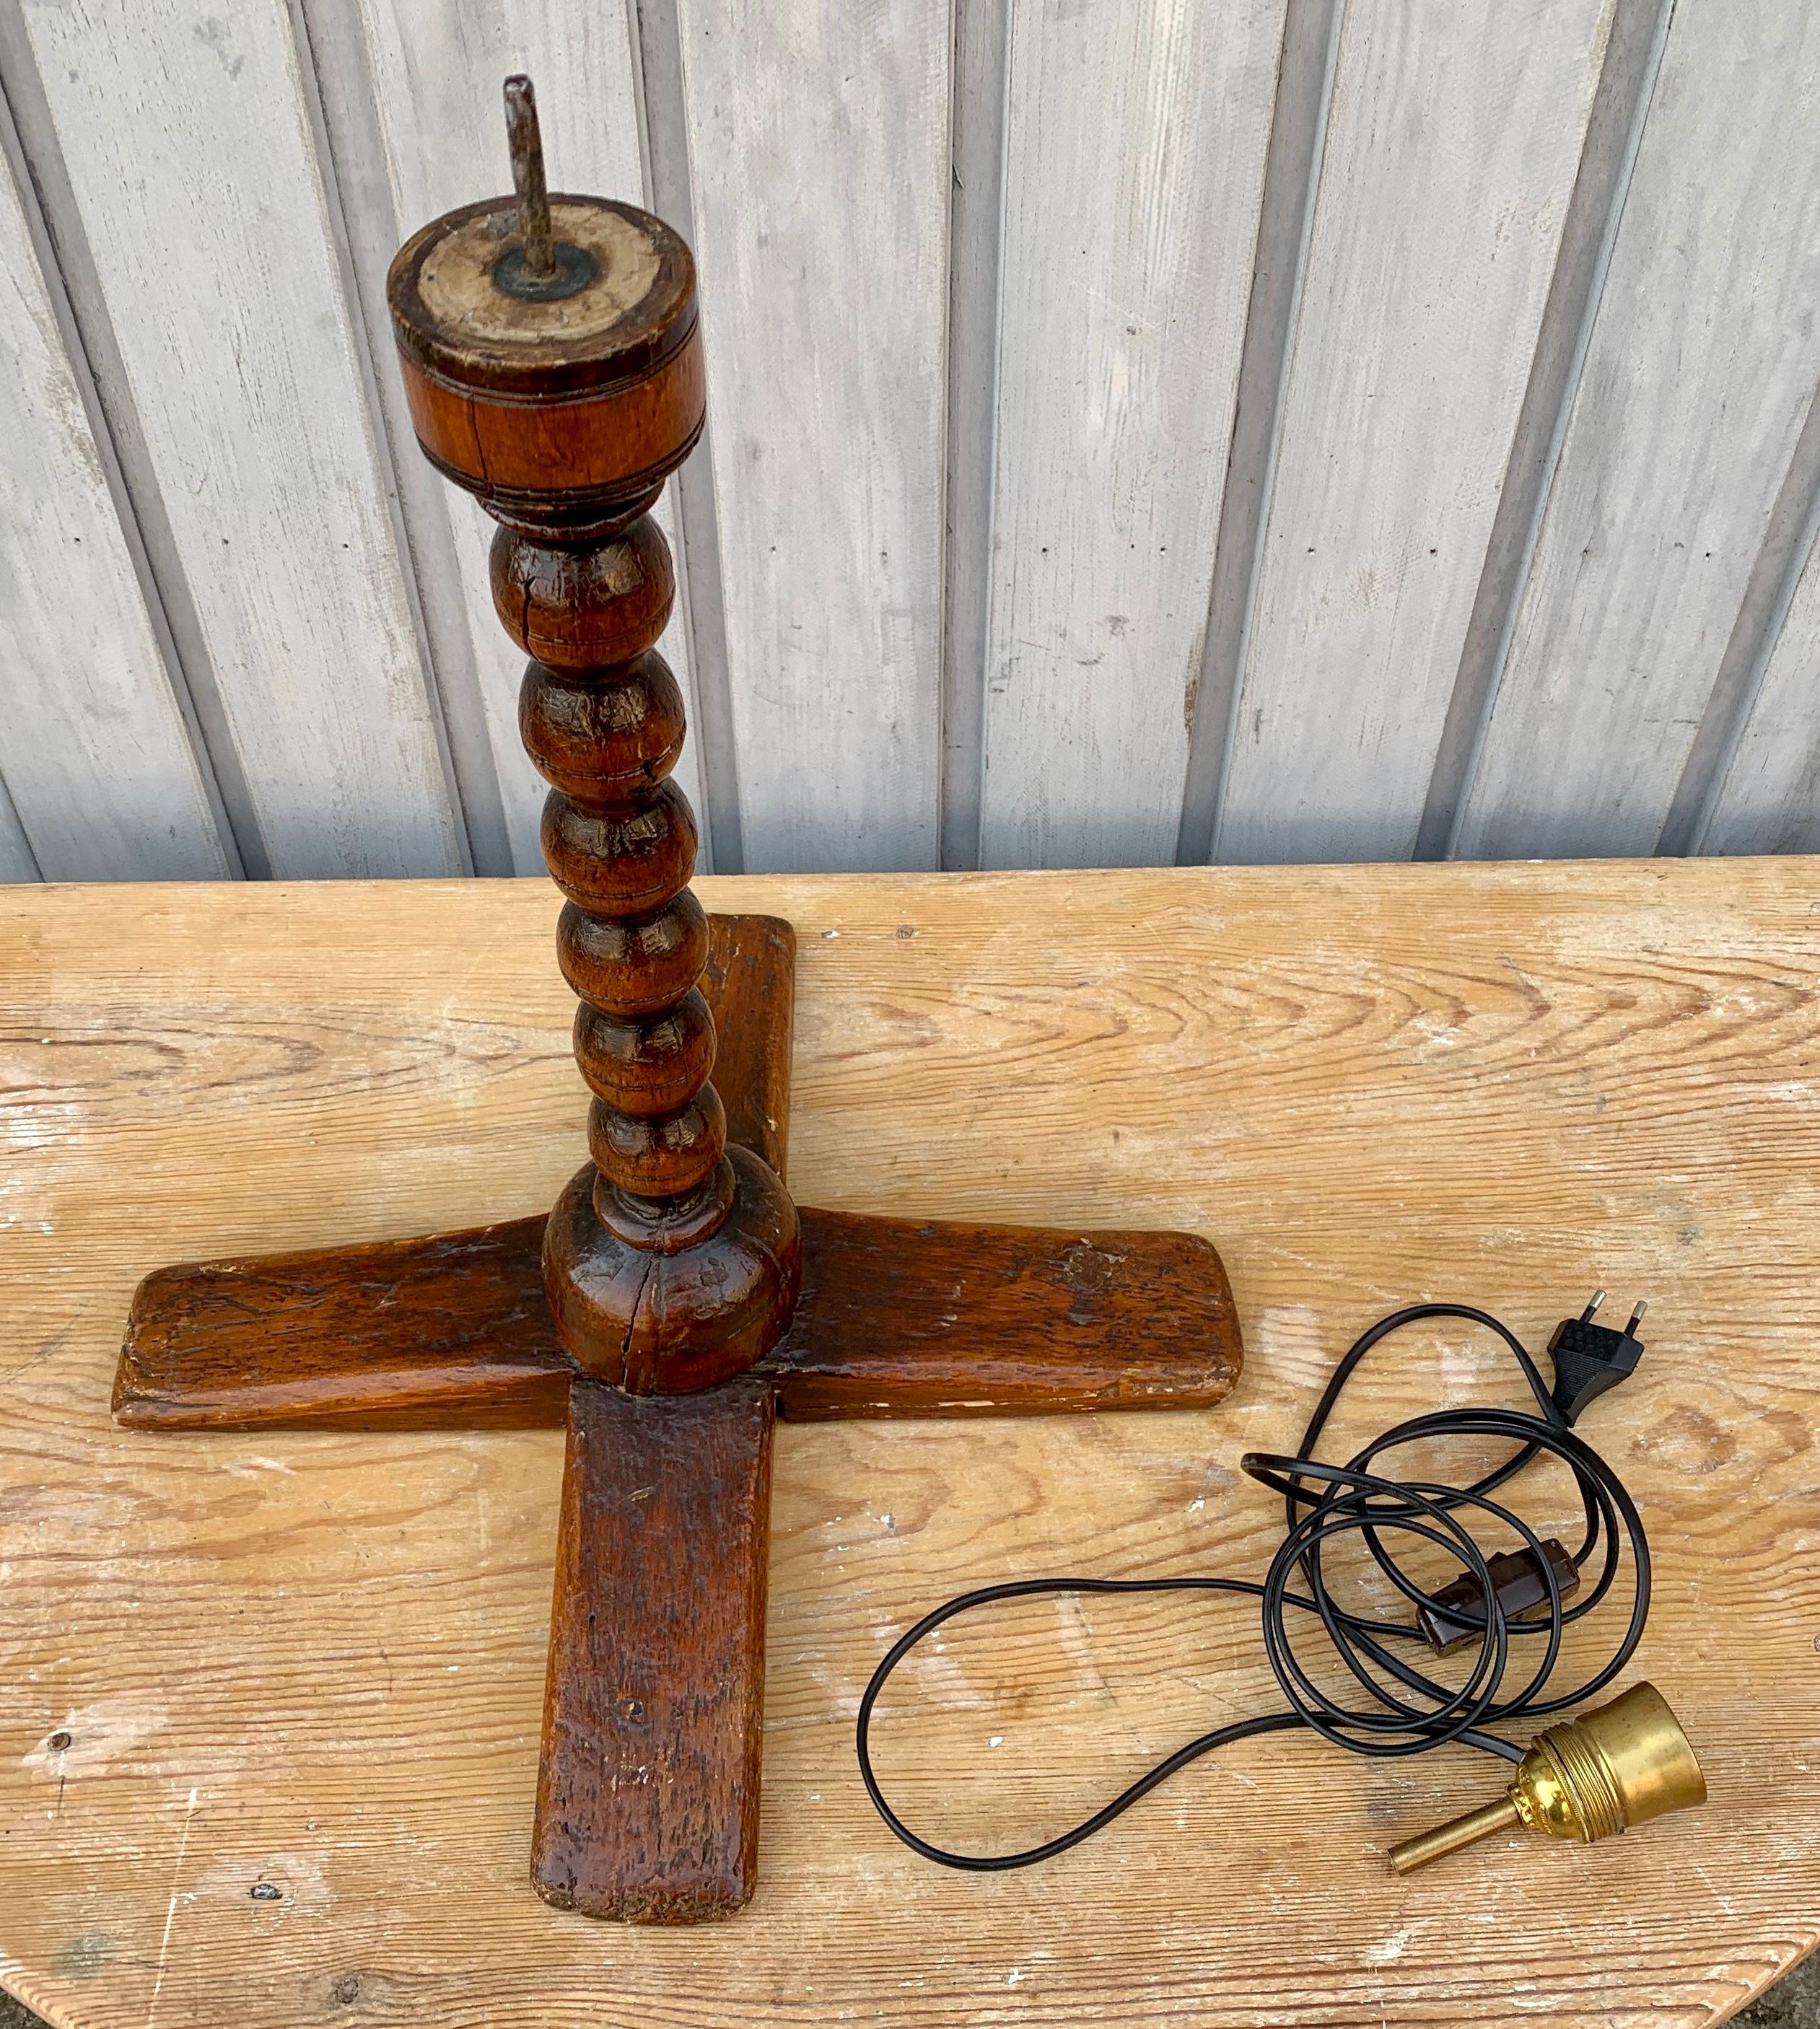 Swedish Folk Art Candlestick Table Lamp, Dated 1737 For Sale 6